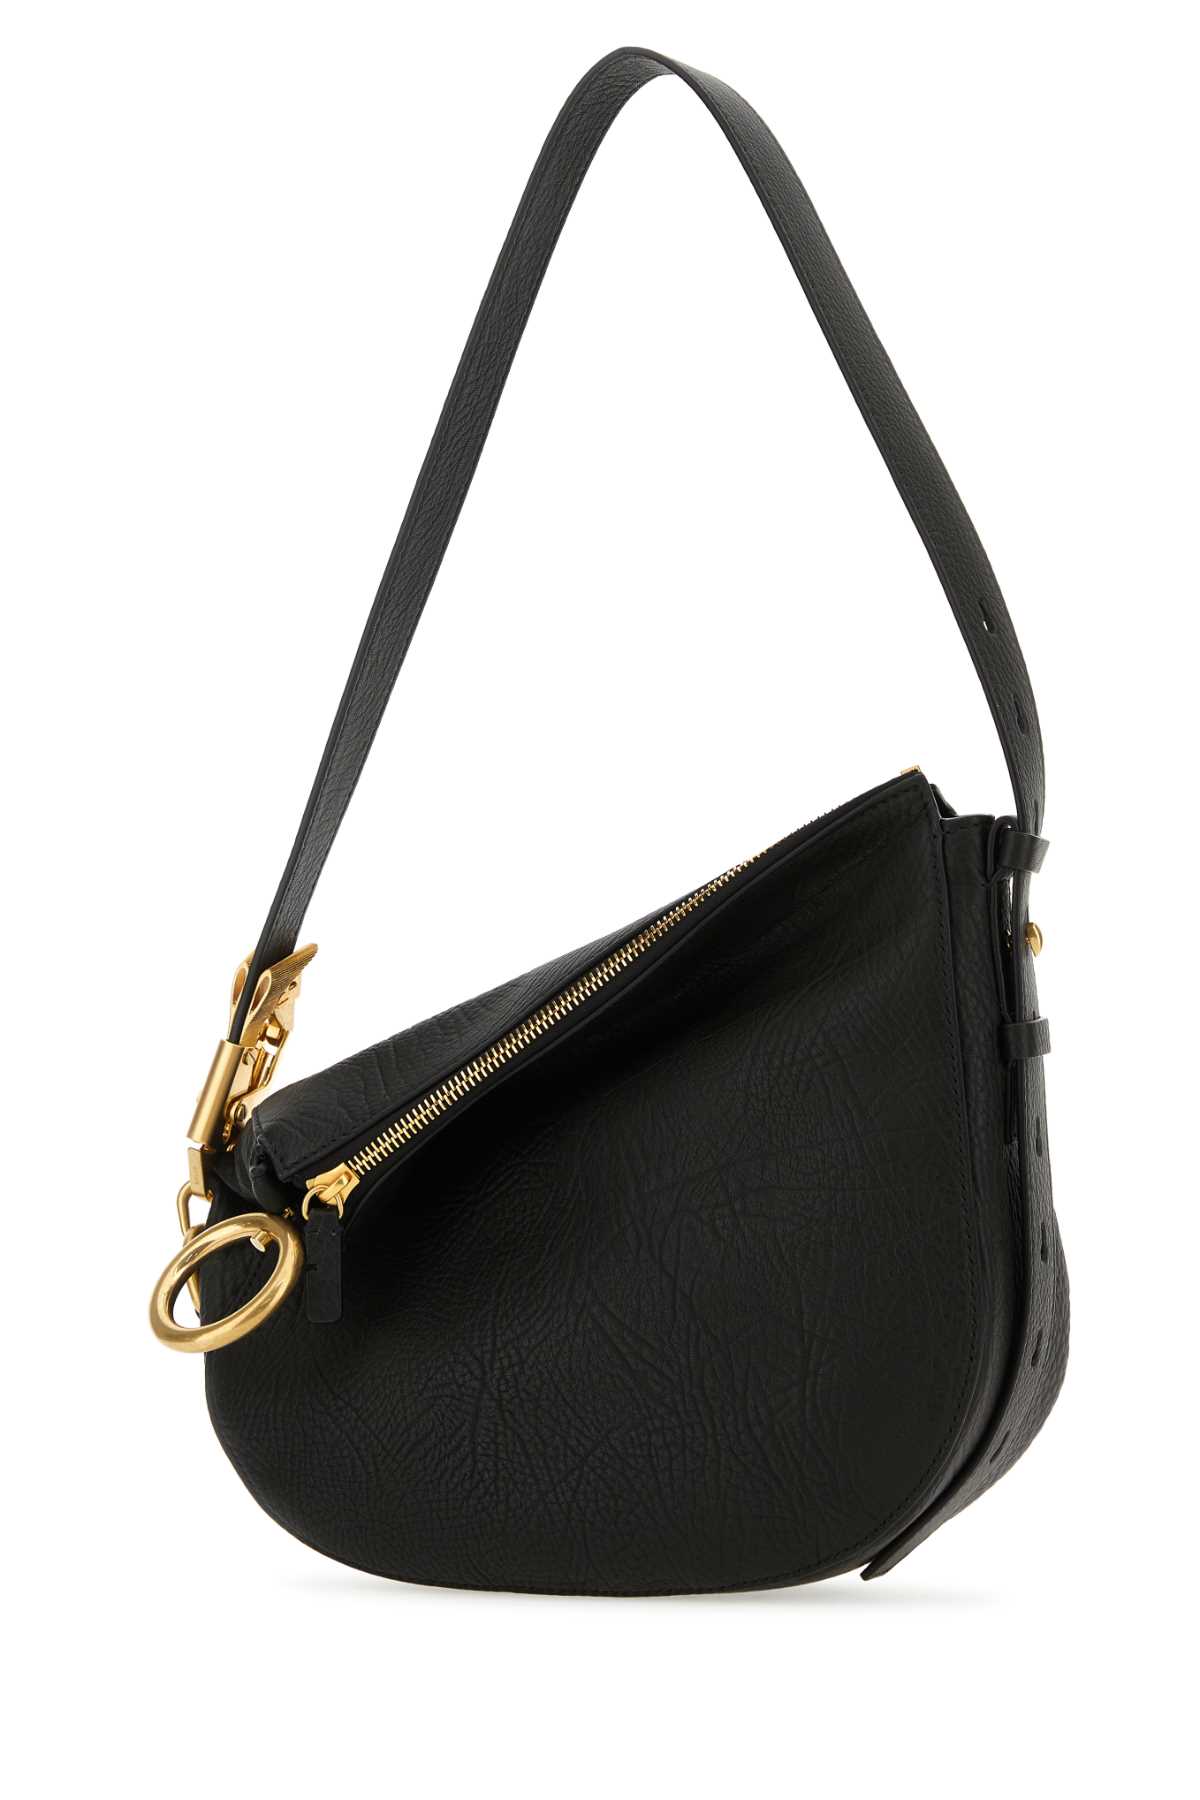 Burberry Black Leather Knight Small Shoulder Bag